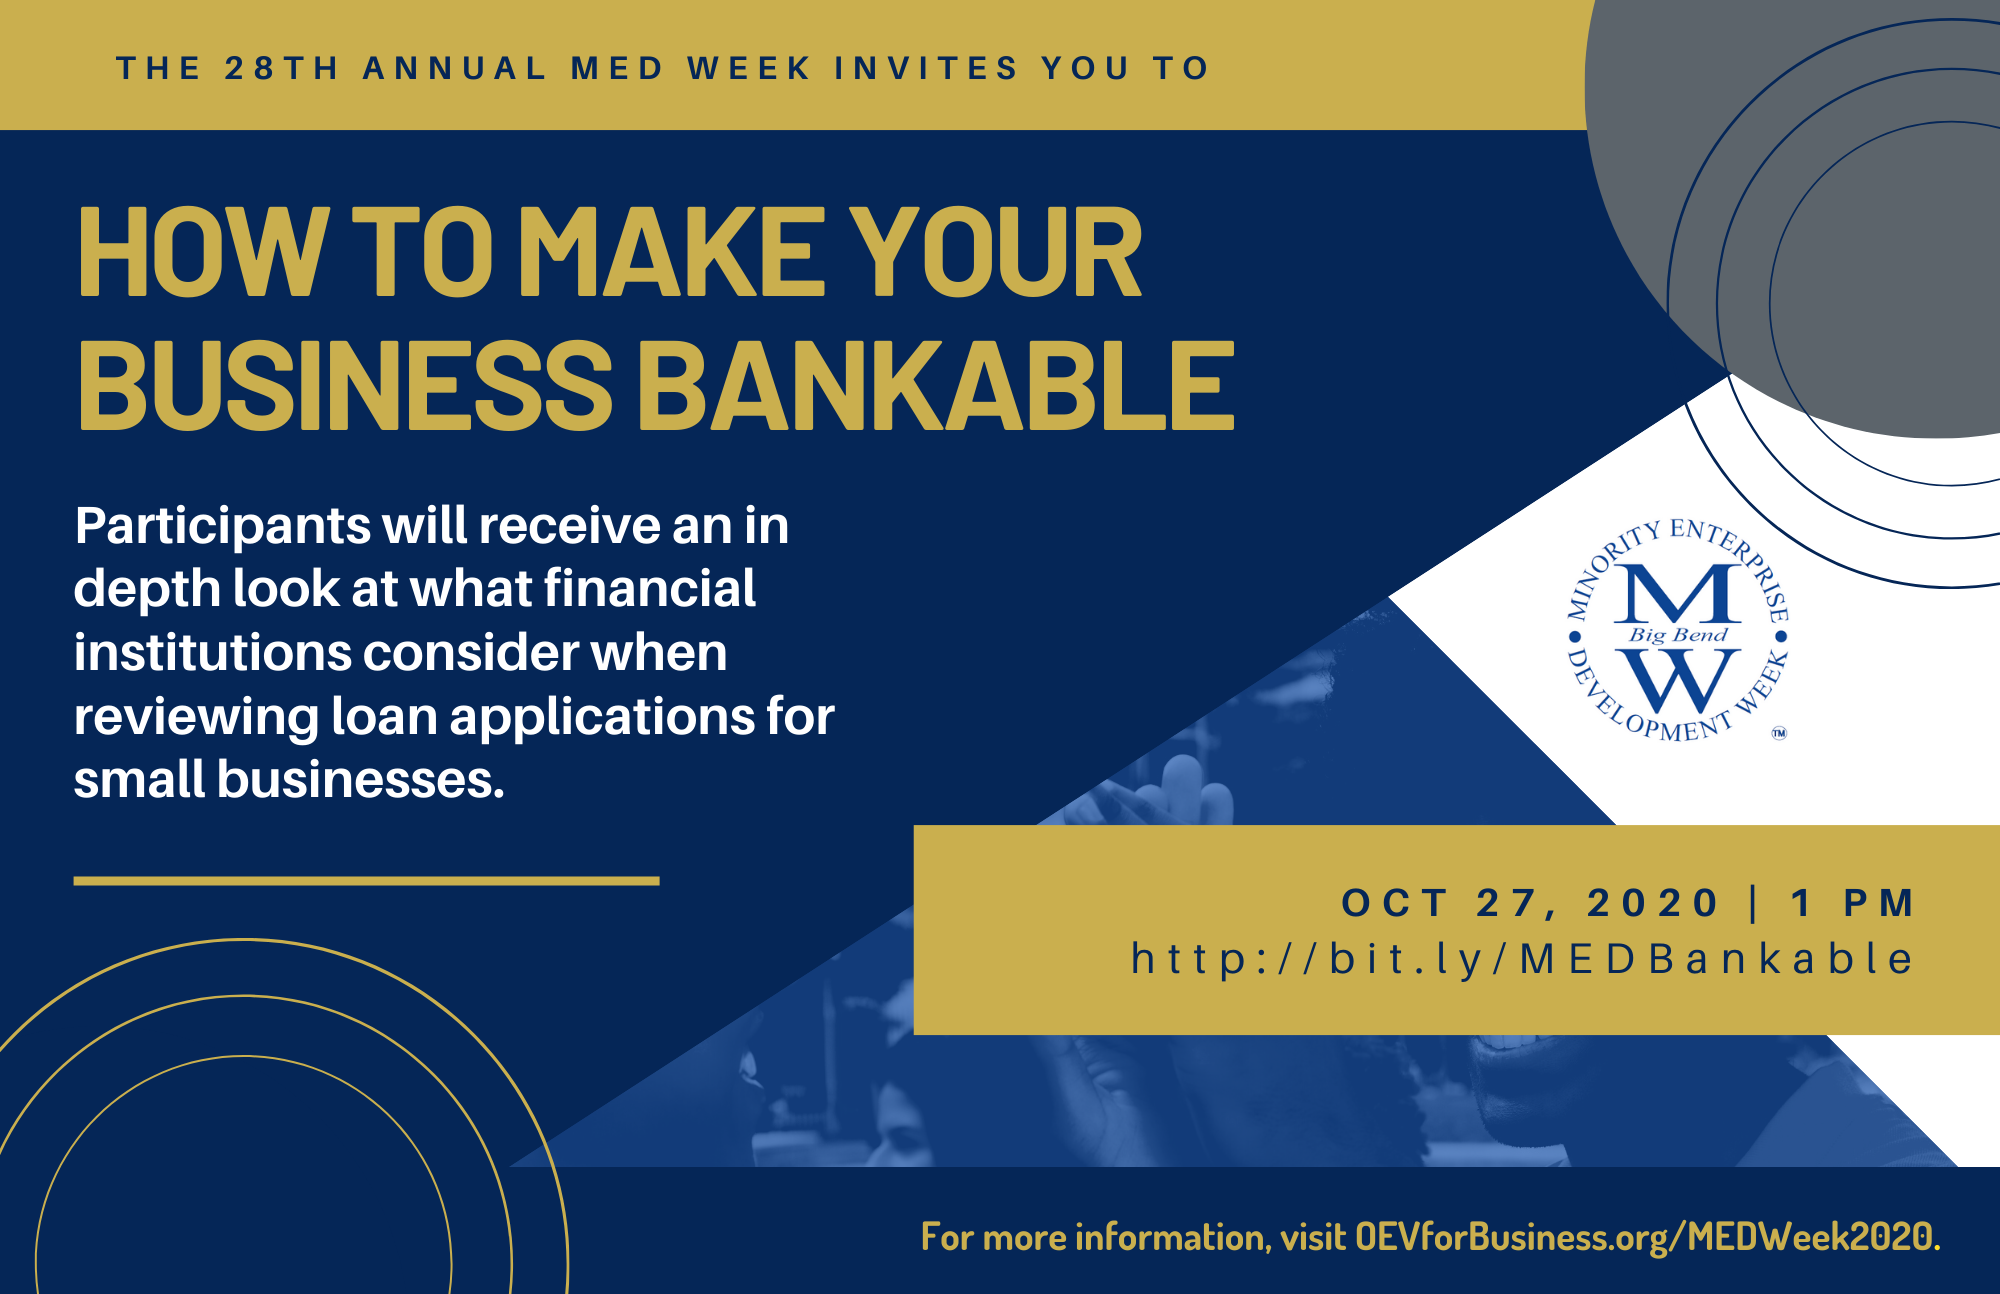 How to Make Your Business Bankable